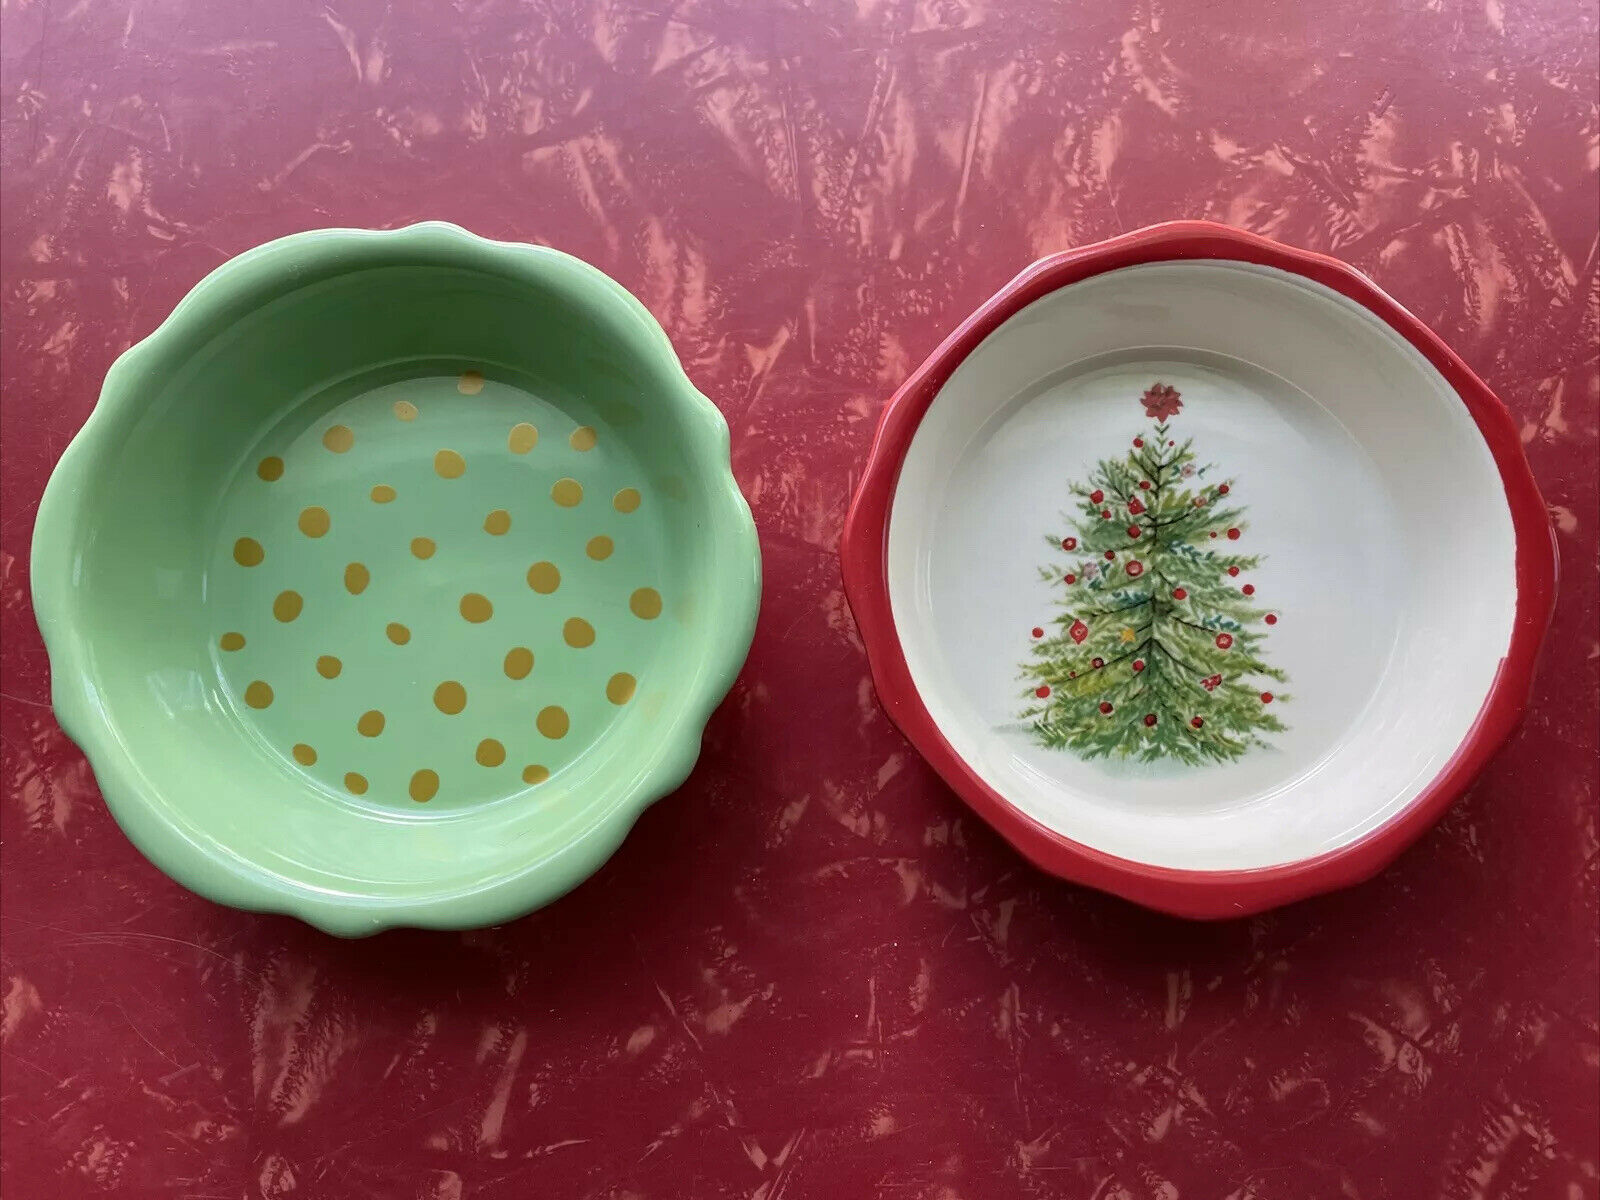 Pioneer Woman New Mini Pie 5 Inch Plates Joy And Holiday Cheer Set Of 2